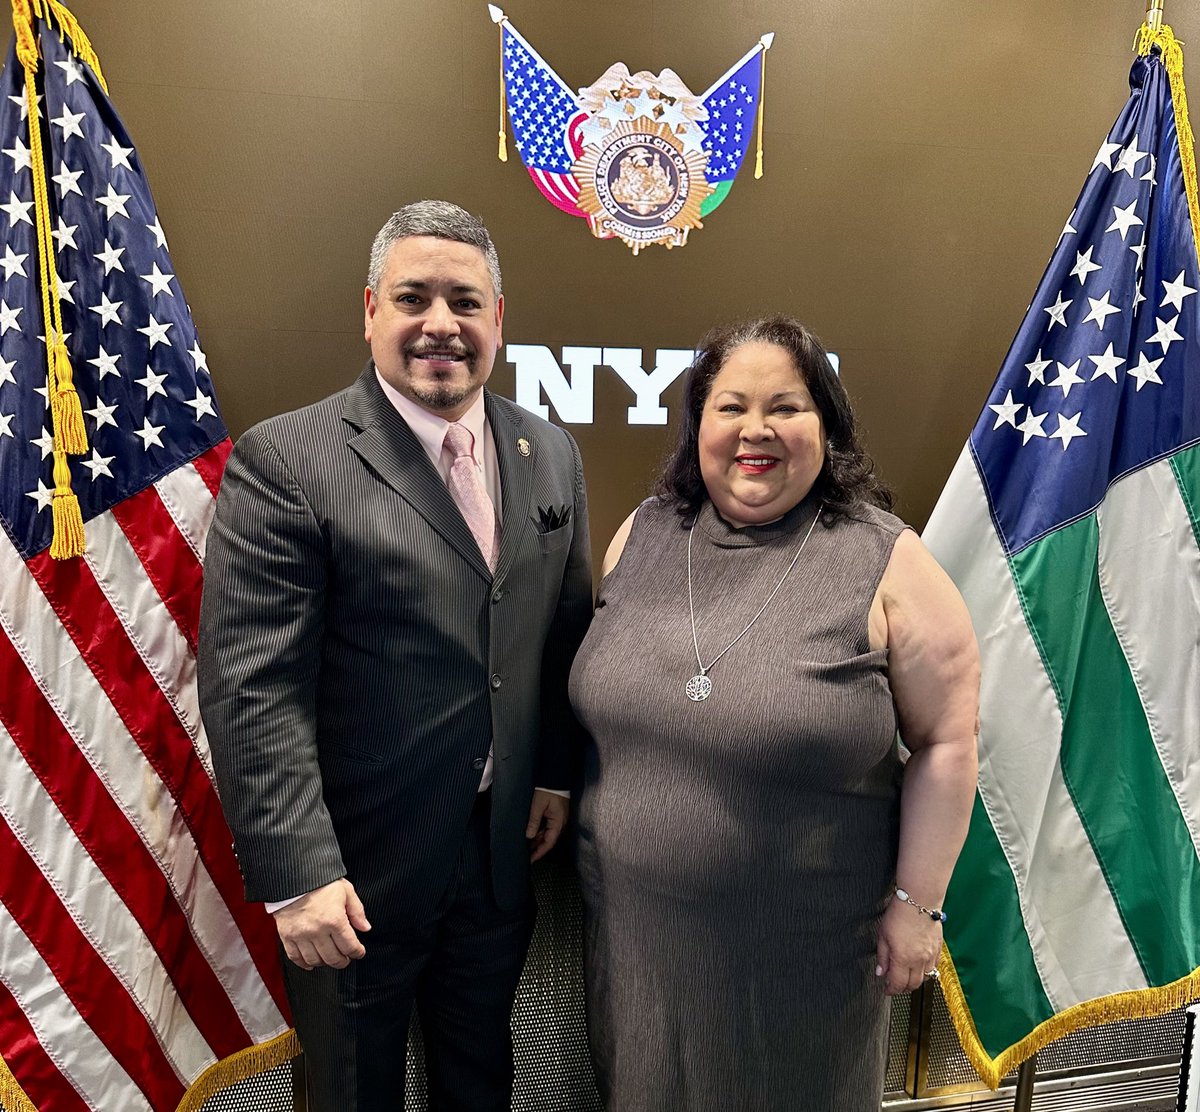 Today, I had the pleasure of meeting with Rossana Rosado, the Commissioner of the New York State Division of Criminal Justice.   The NYPD maintains strong relationships with our law enforcement partners and elected officials to keep New Yorkers safe — always.